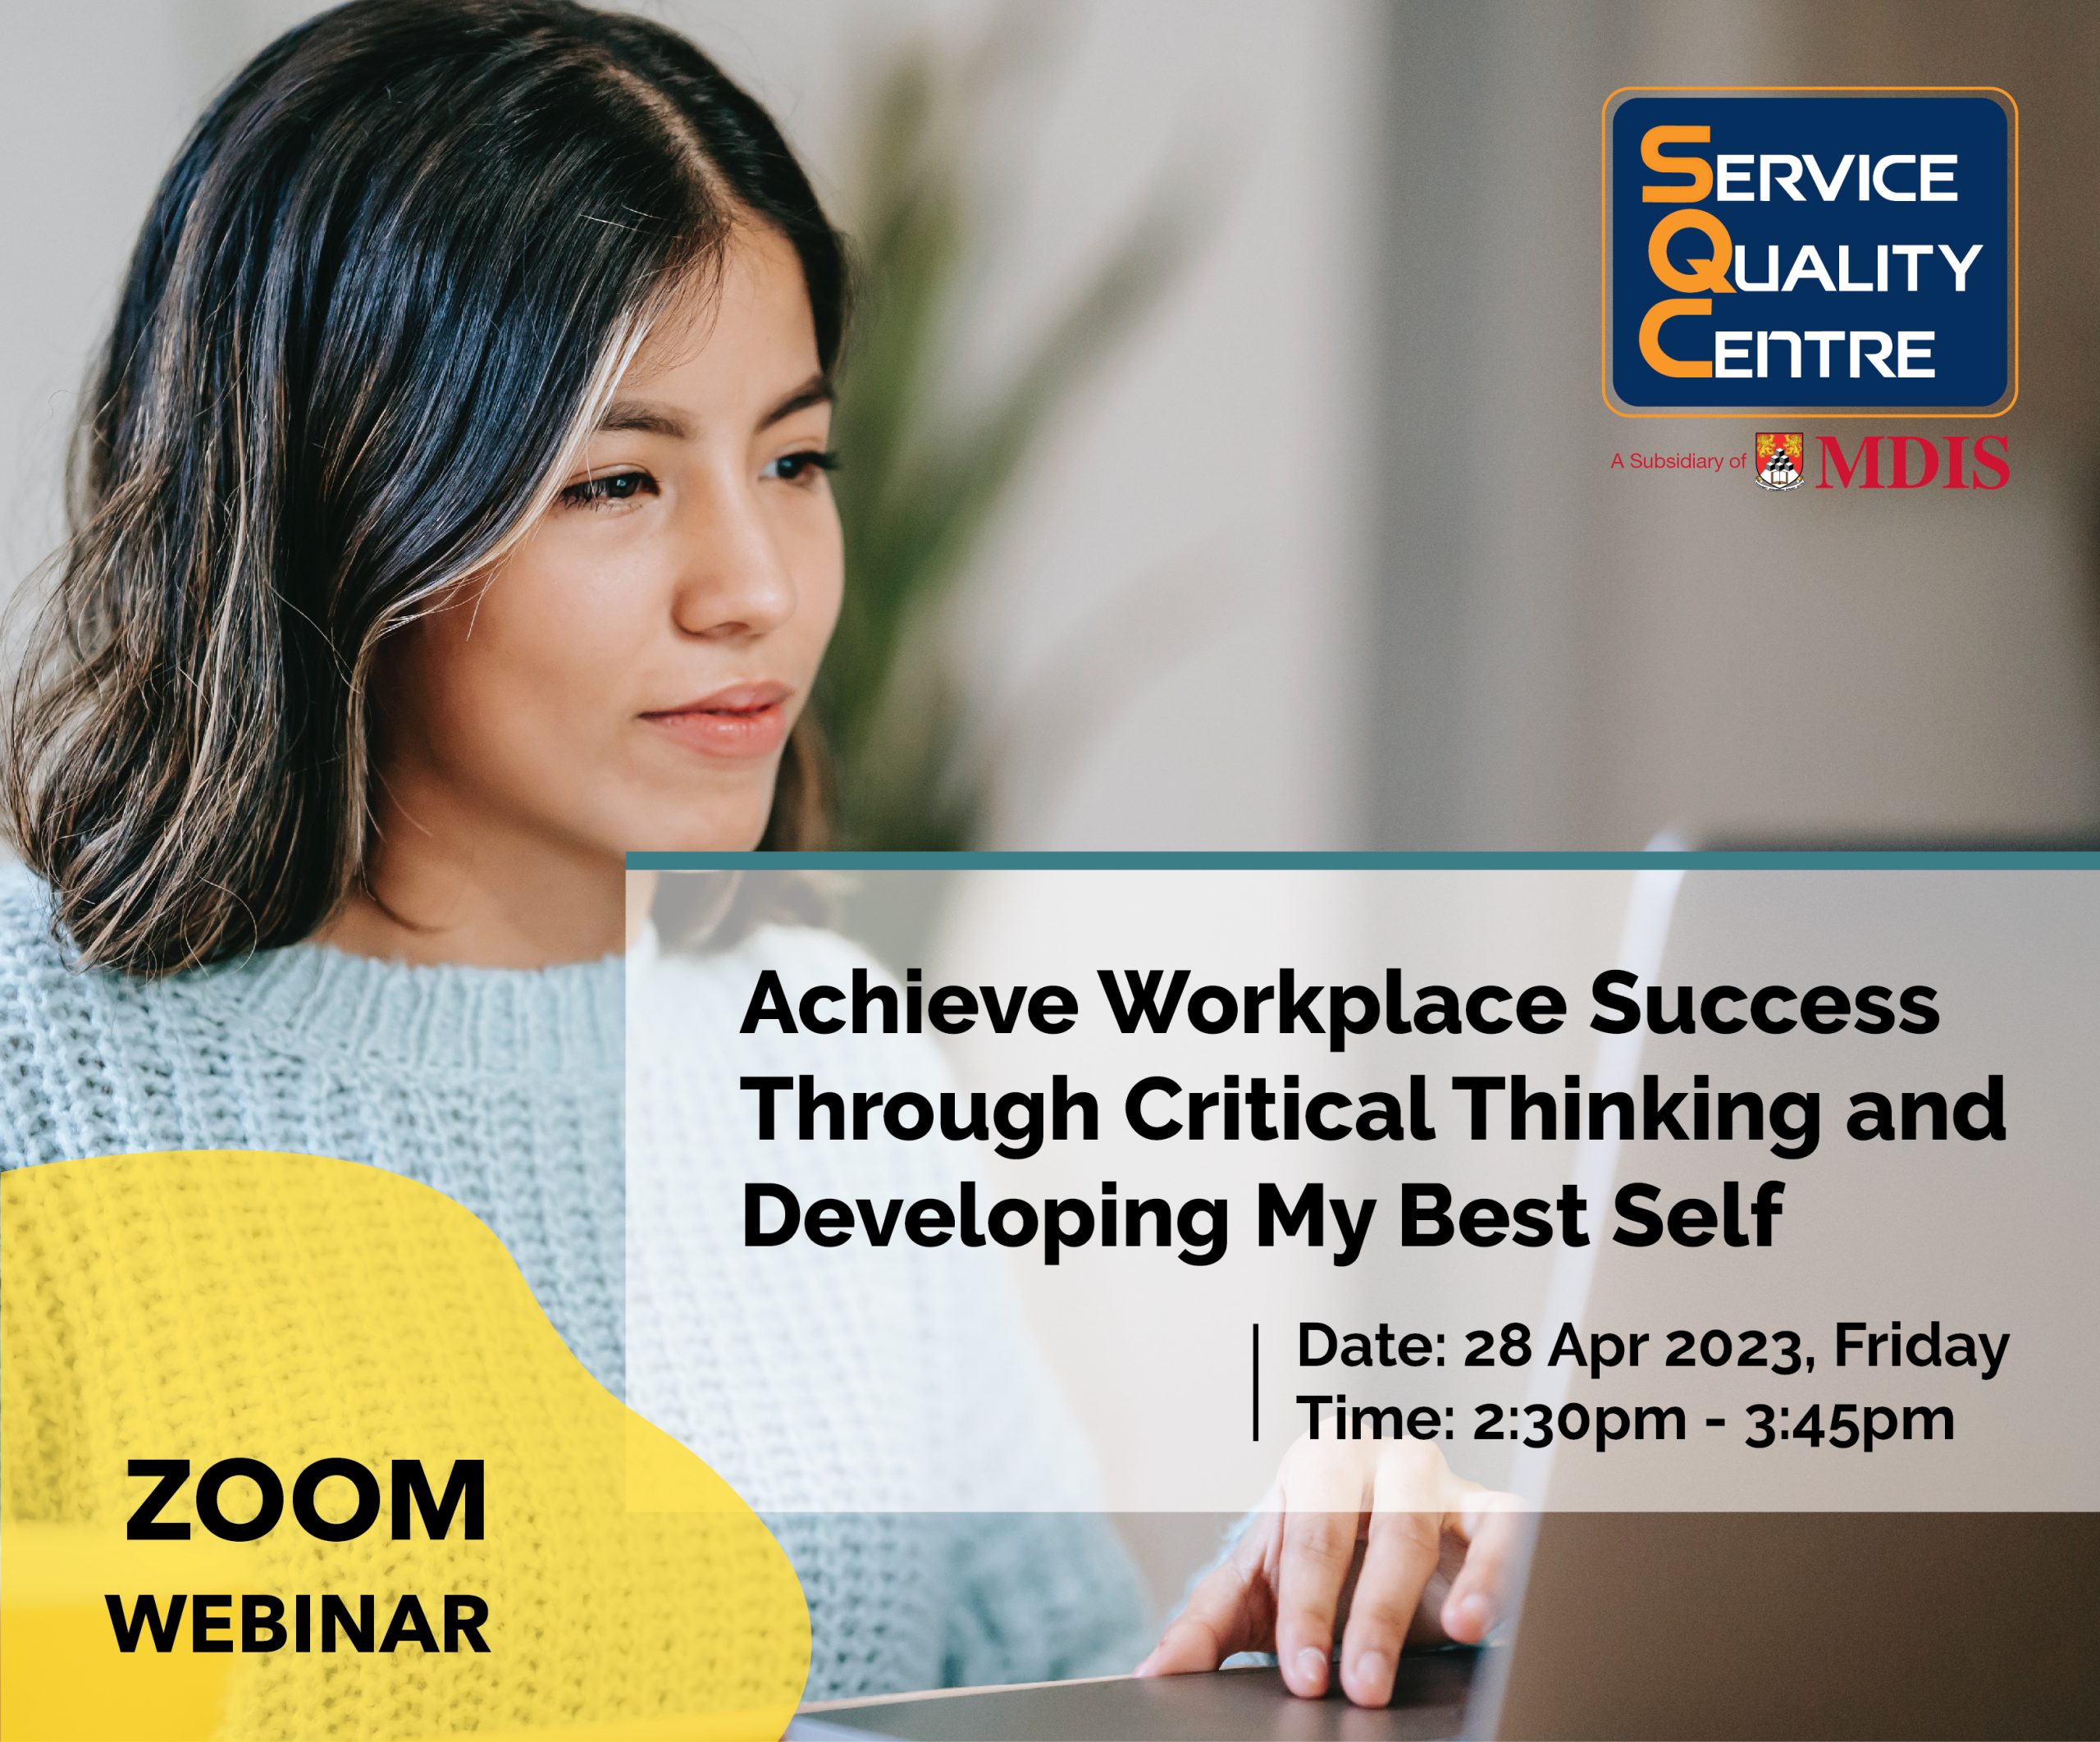 2023 (Apr 28) – Achieve Workplace Success Through Critical Thinking And Developing My Best Self